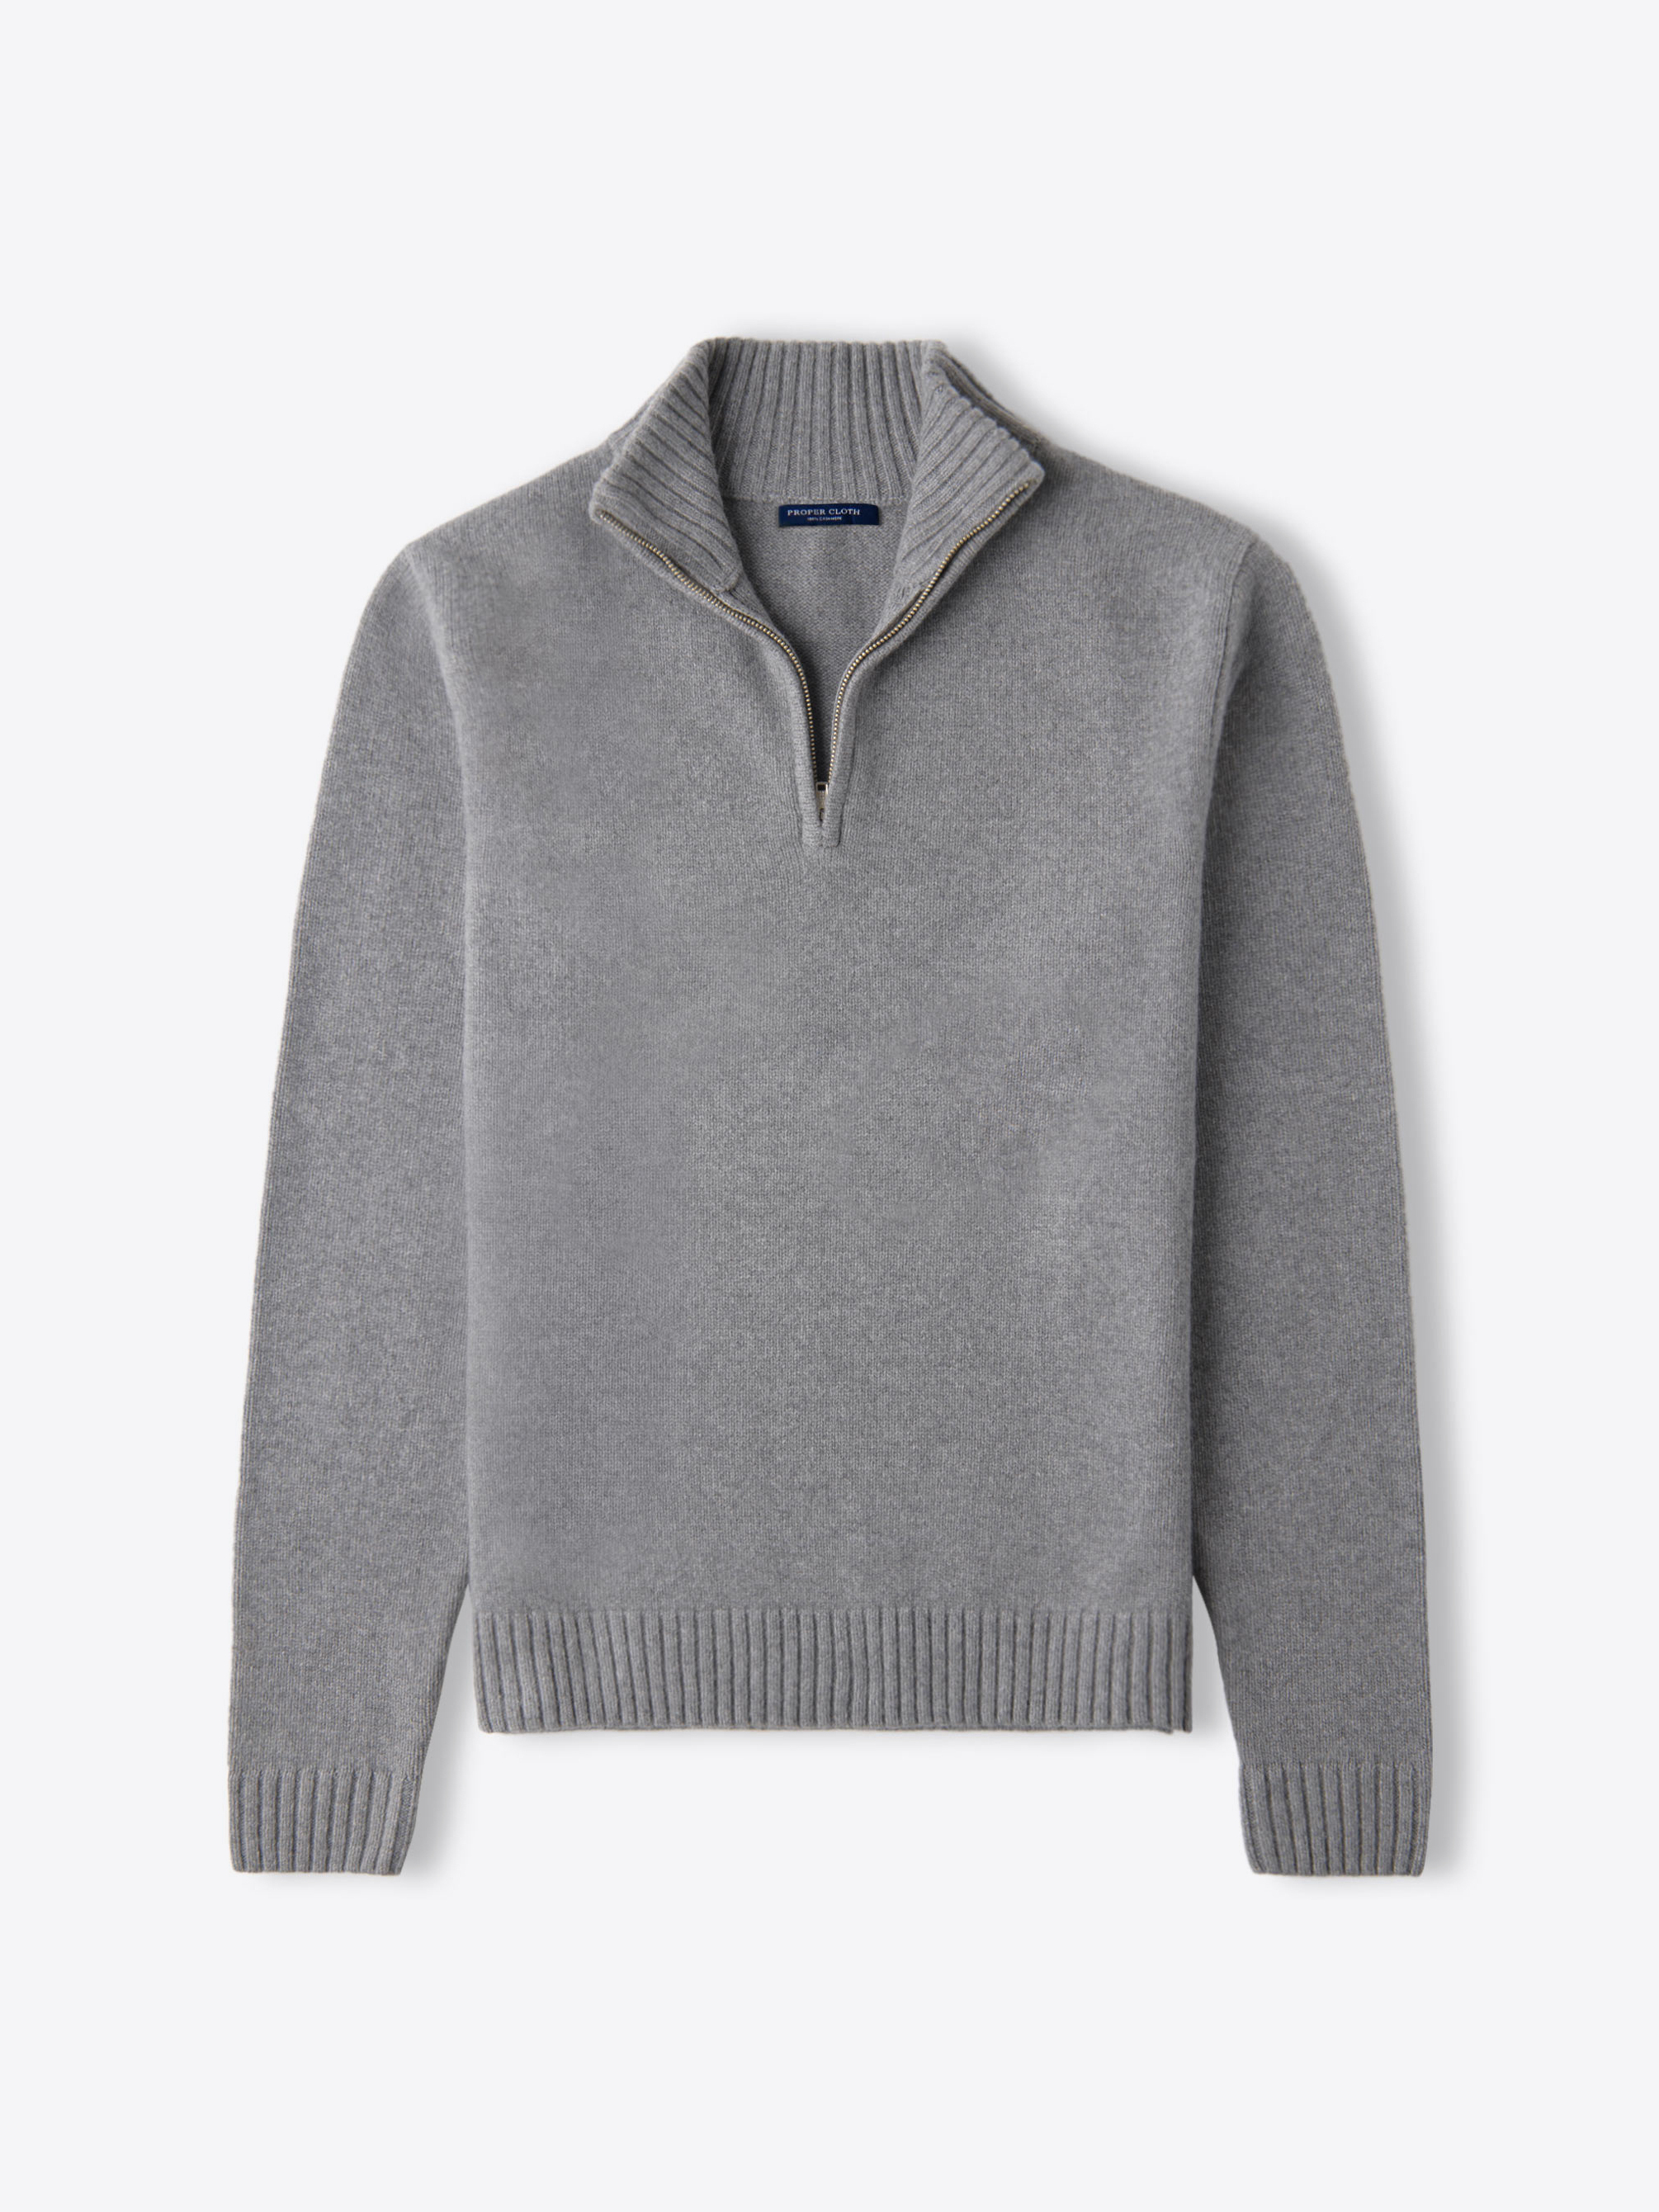 Zoom Image of Grey Wool and Cashmere Half-Zip Sweater